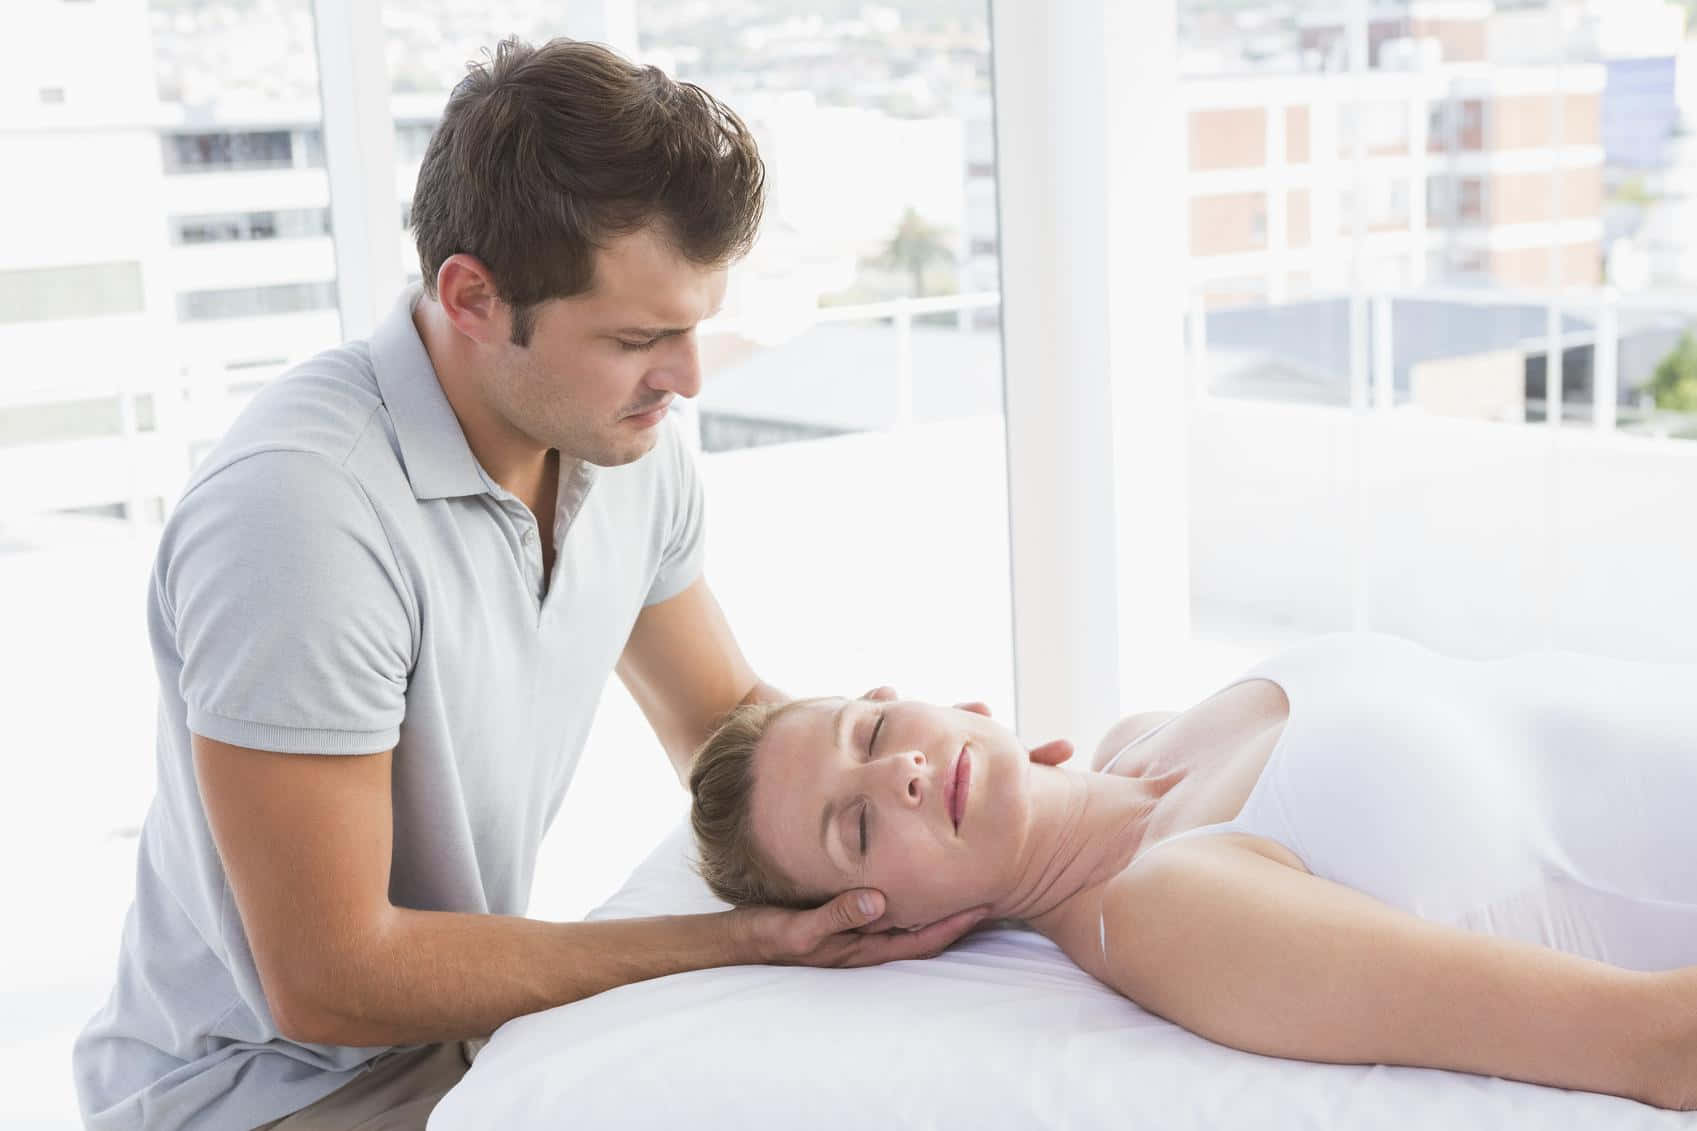 A Man Is Giving A Massage To A Woman Wallpaper